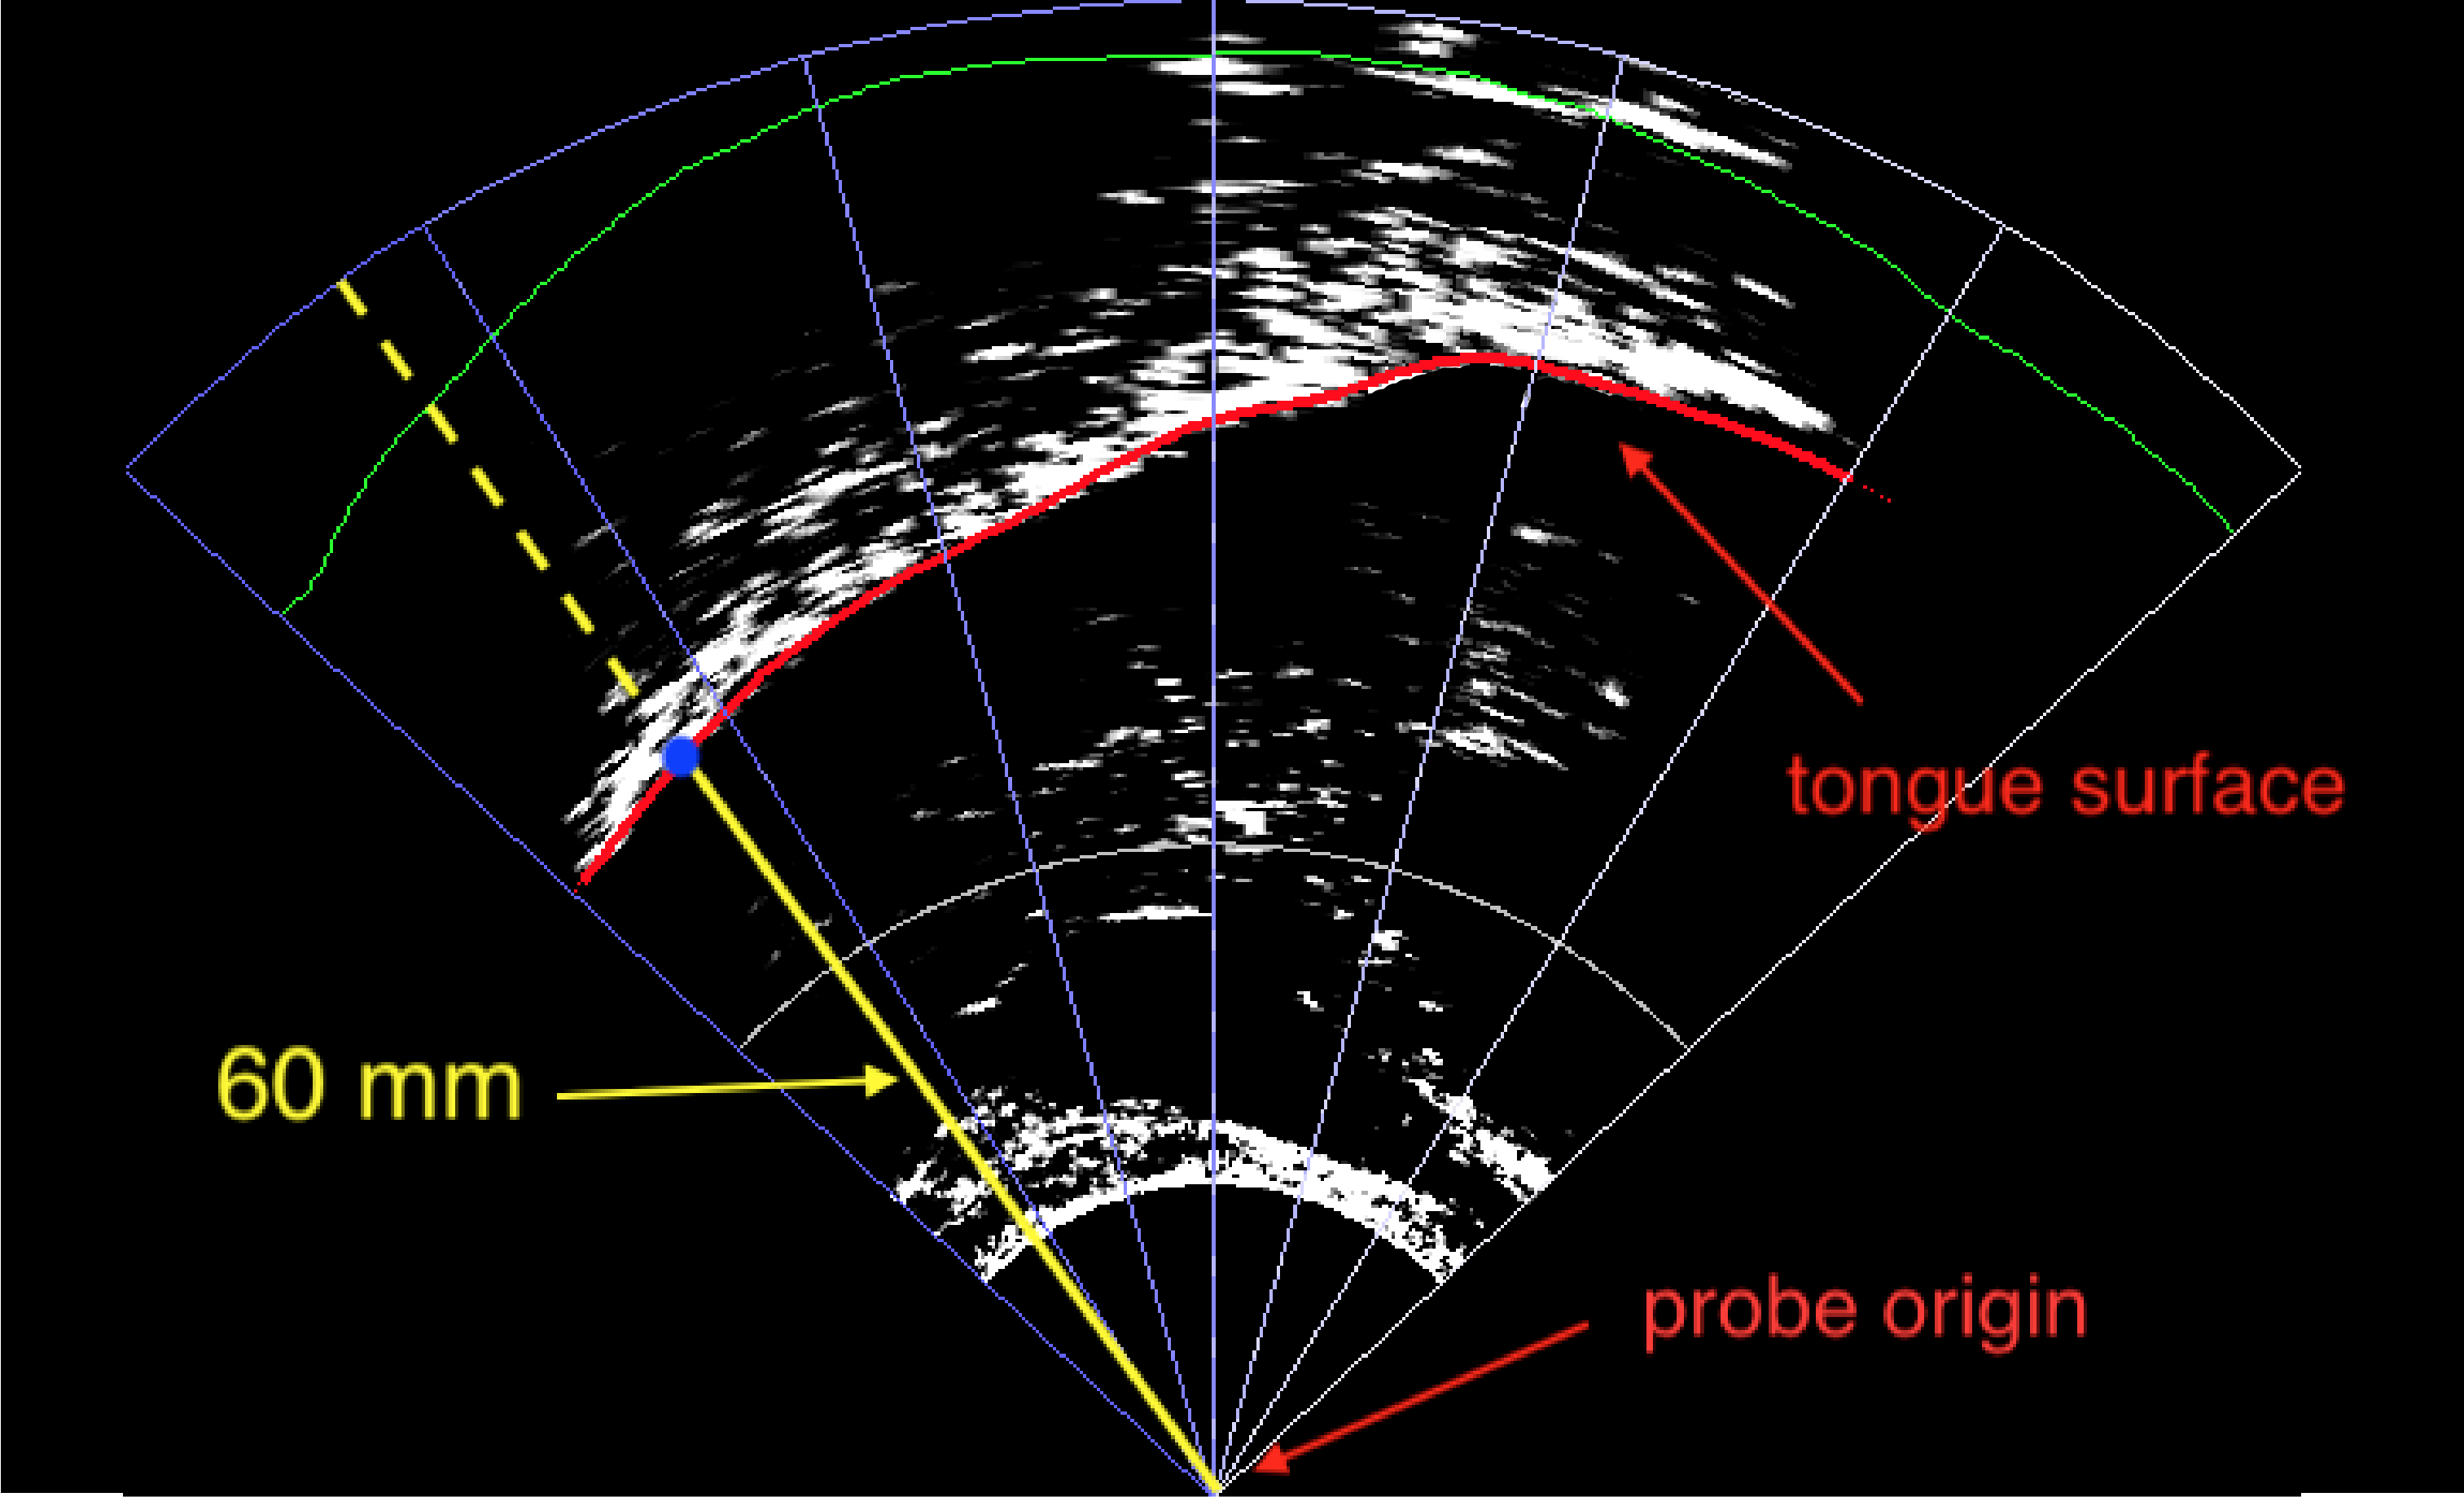 Schematics of the operationalisation of tongue root position, based on @kirkham2017. The tongue root surface corresponds to the lower edge of the white band in the image. The tongue tip is on the right side. The outline of the fan-like coordinate systems is shown. The yellow line starting from the probe origin is the selected fan-line from which tongue root position is calculated (see text for the method of fan-line selection). Tongue root position thus corresponds to the distance (in millimetres) between the probe origin and the intersecting point of the tongue surface with the selected fan-line.